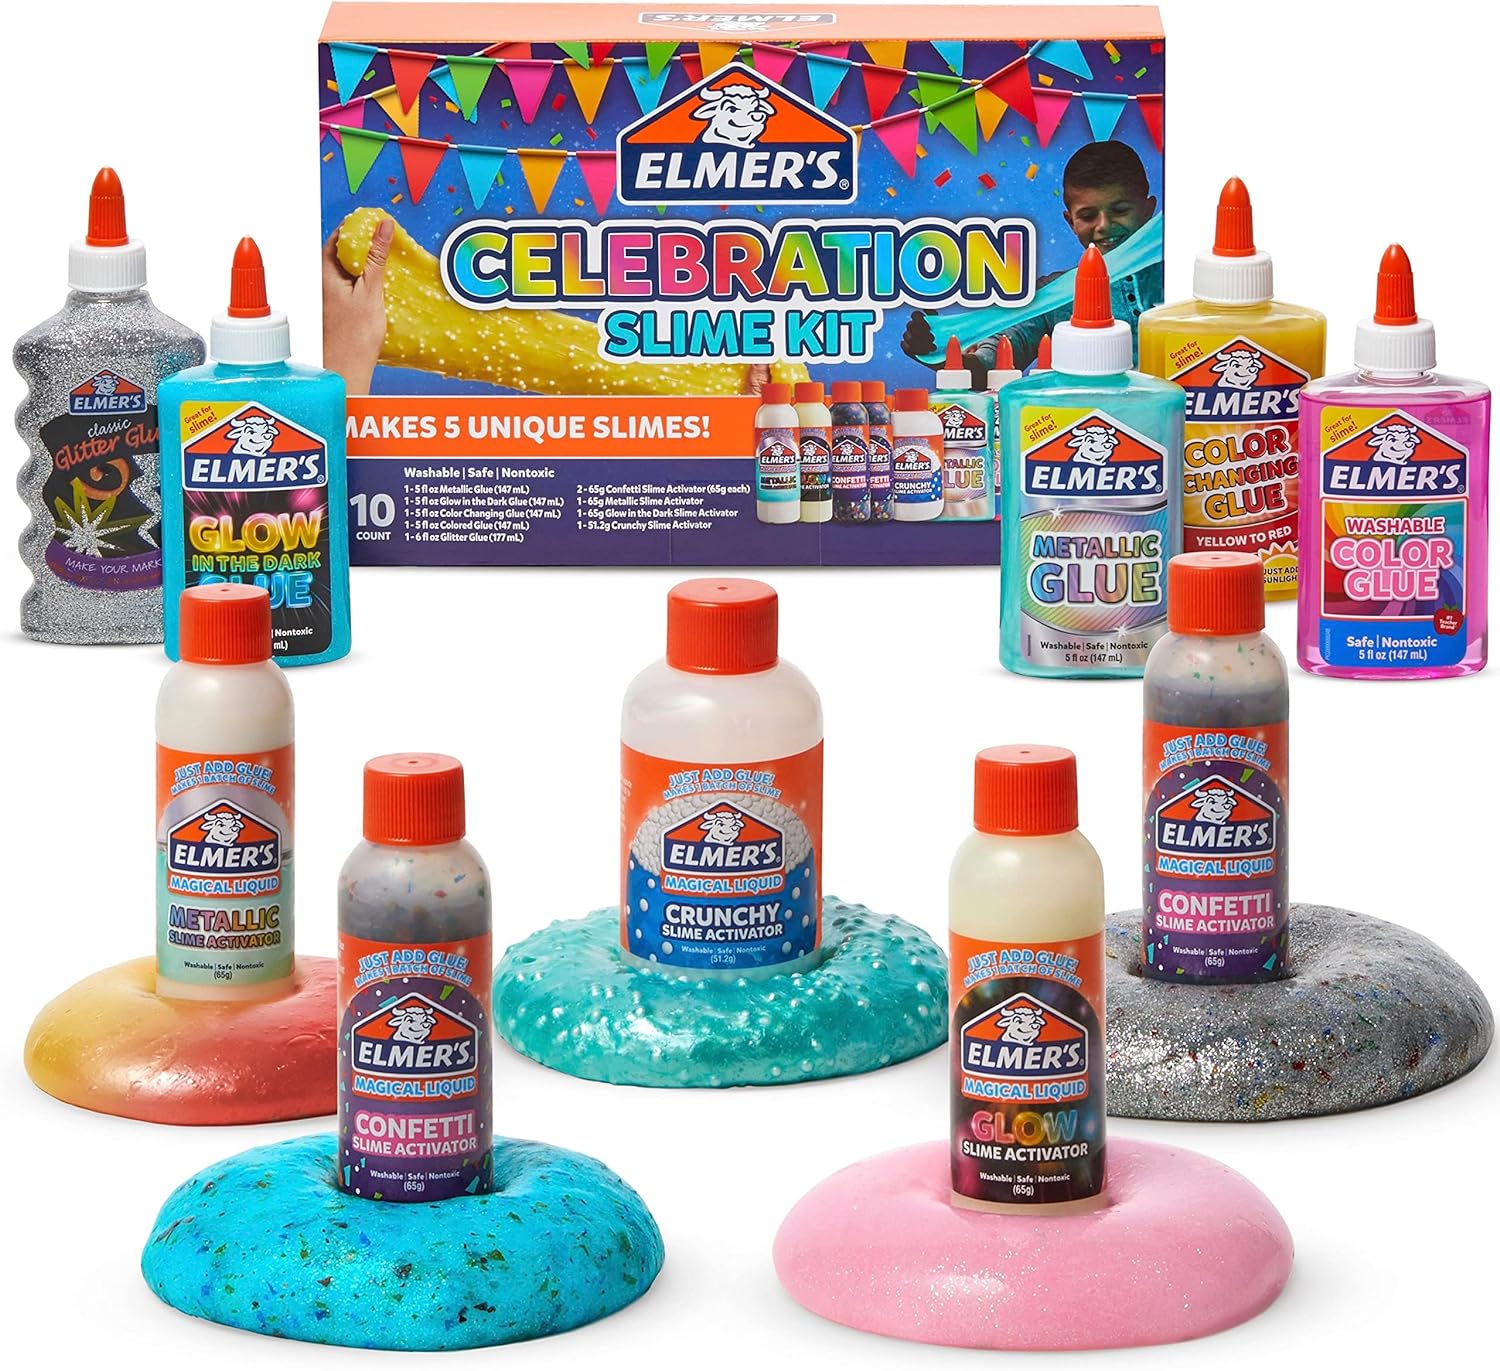 Elmer's Celebration Slime Kit, 10 Count The possibilities of slime are only limited by your imagination when you use Elmer's Glue and Magical Liquid Slime Activators.